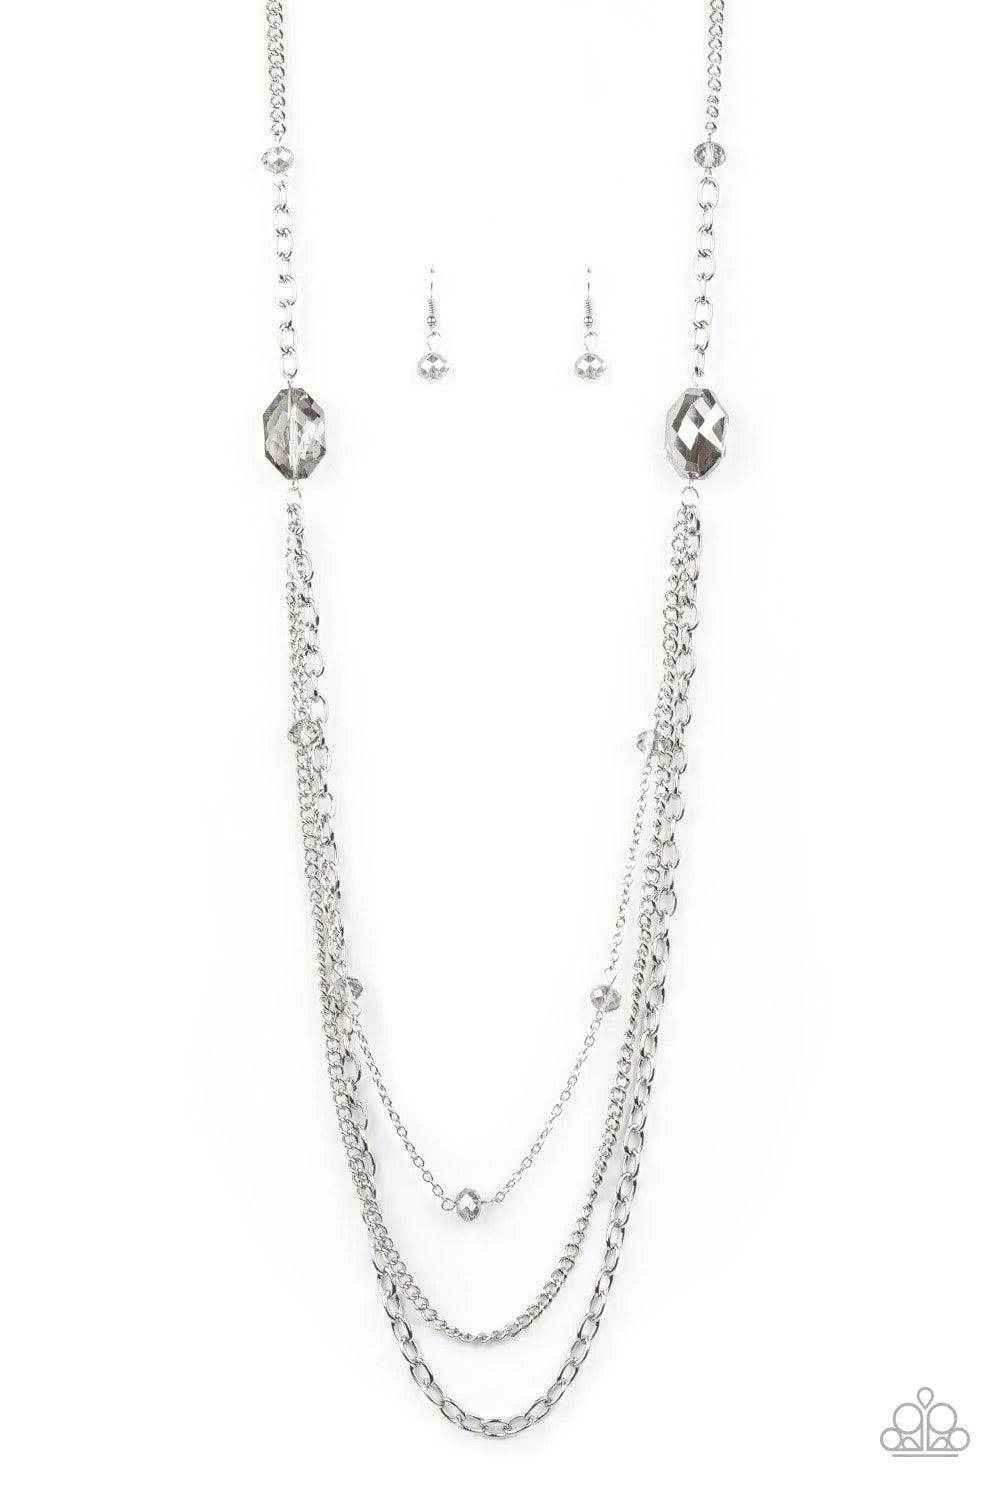 Dare To Dazzle - Silver - Beautifully Blinged